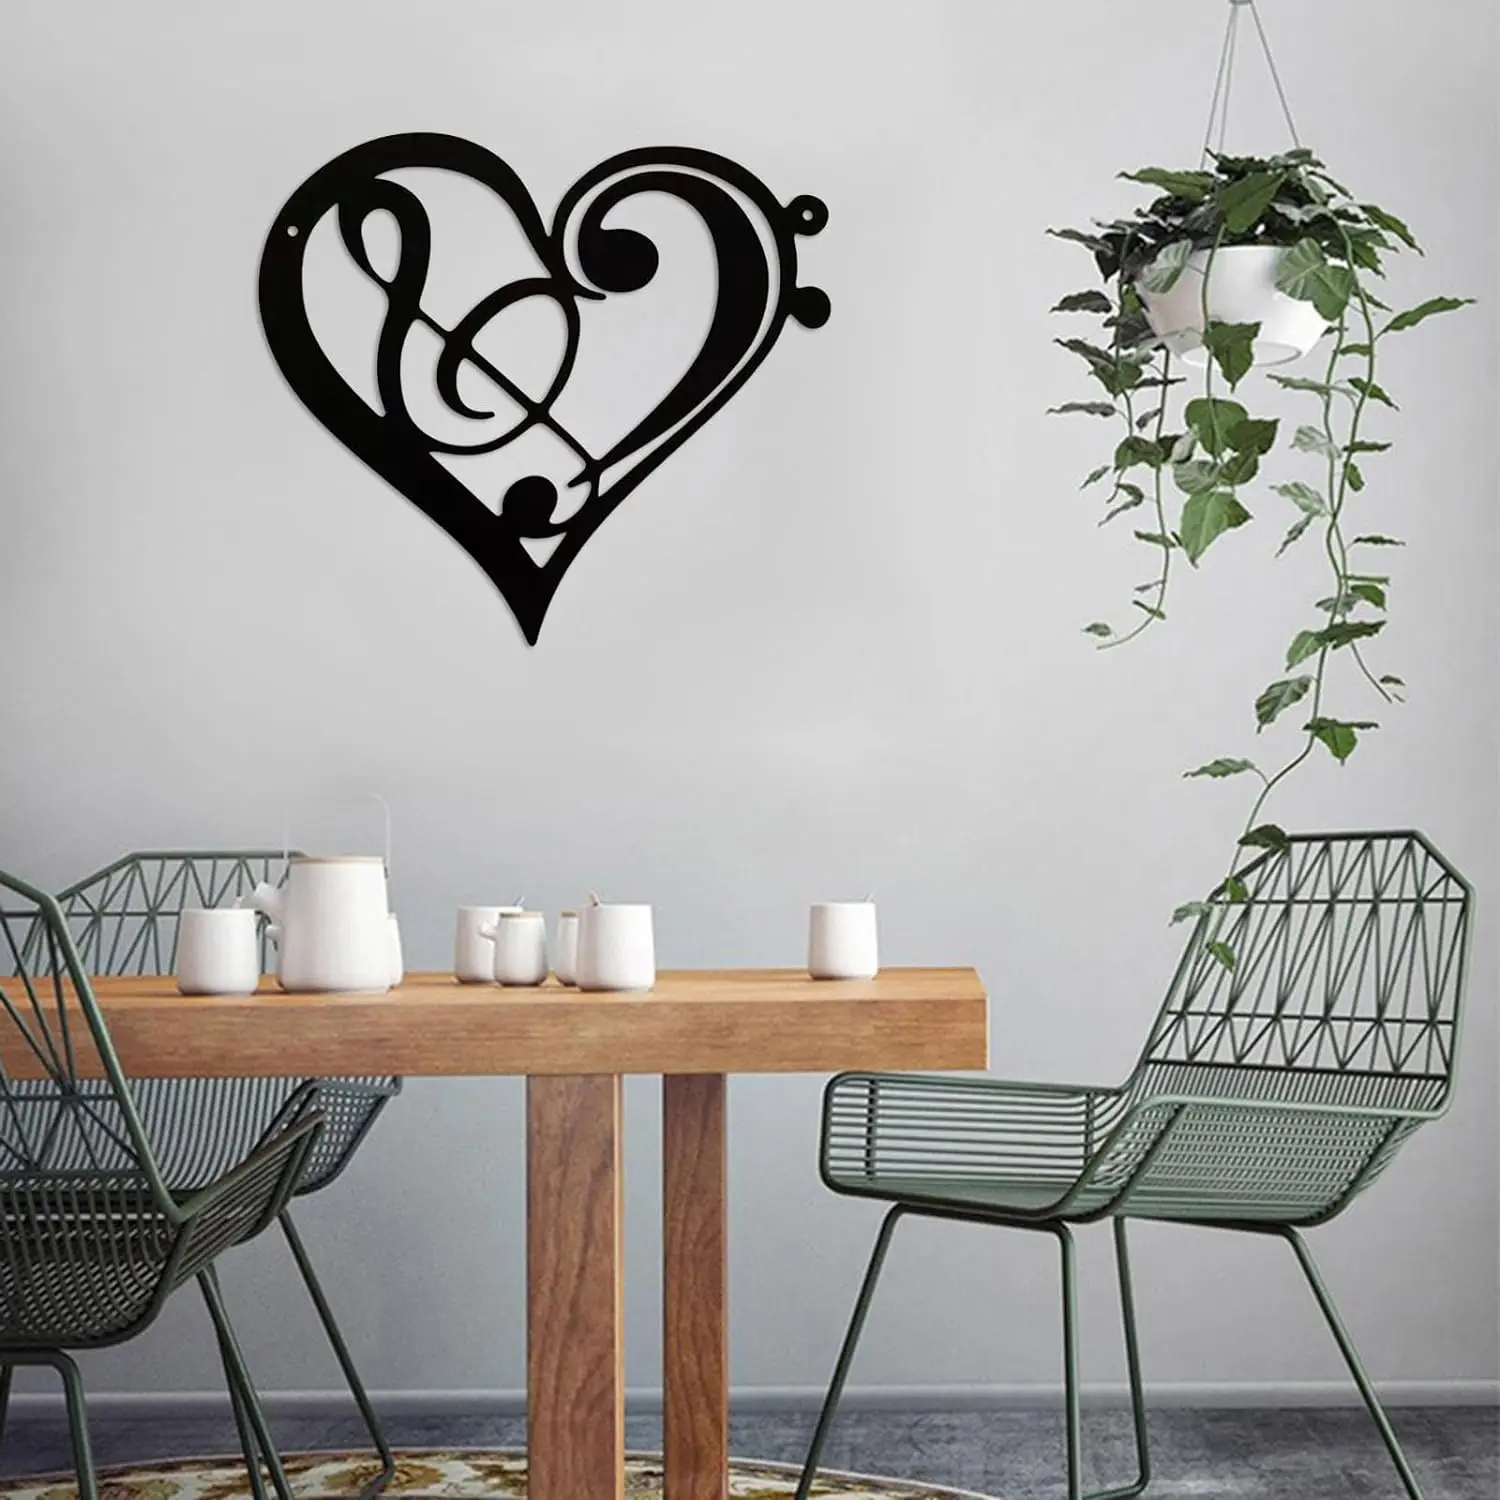 

CIFBUY Deco Heart Metal Music Home Decor Musical Notes Metal Wall Art Vintage Music Theme Note Wall Hanging Sign Music Room Wall